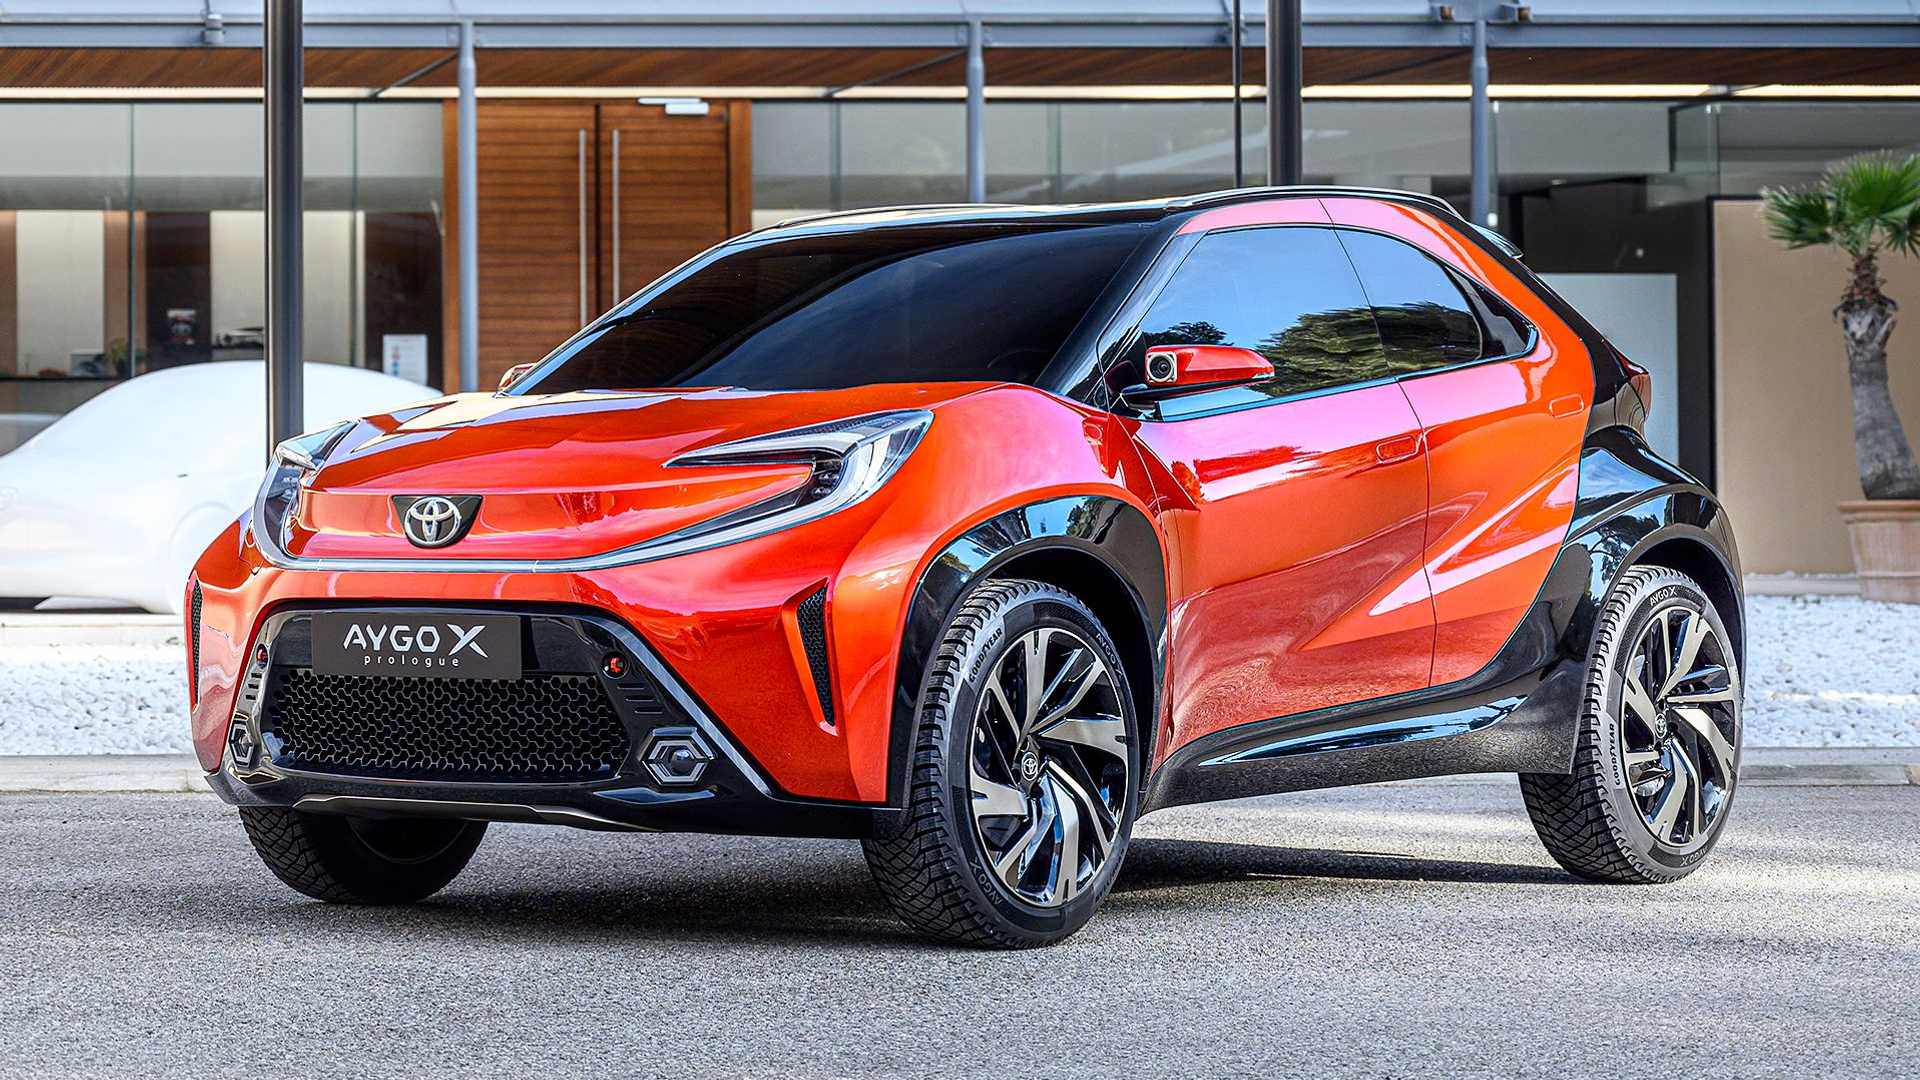 Aygo X Prologue Revealed, The Smallest Toyota SUV